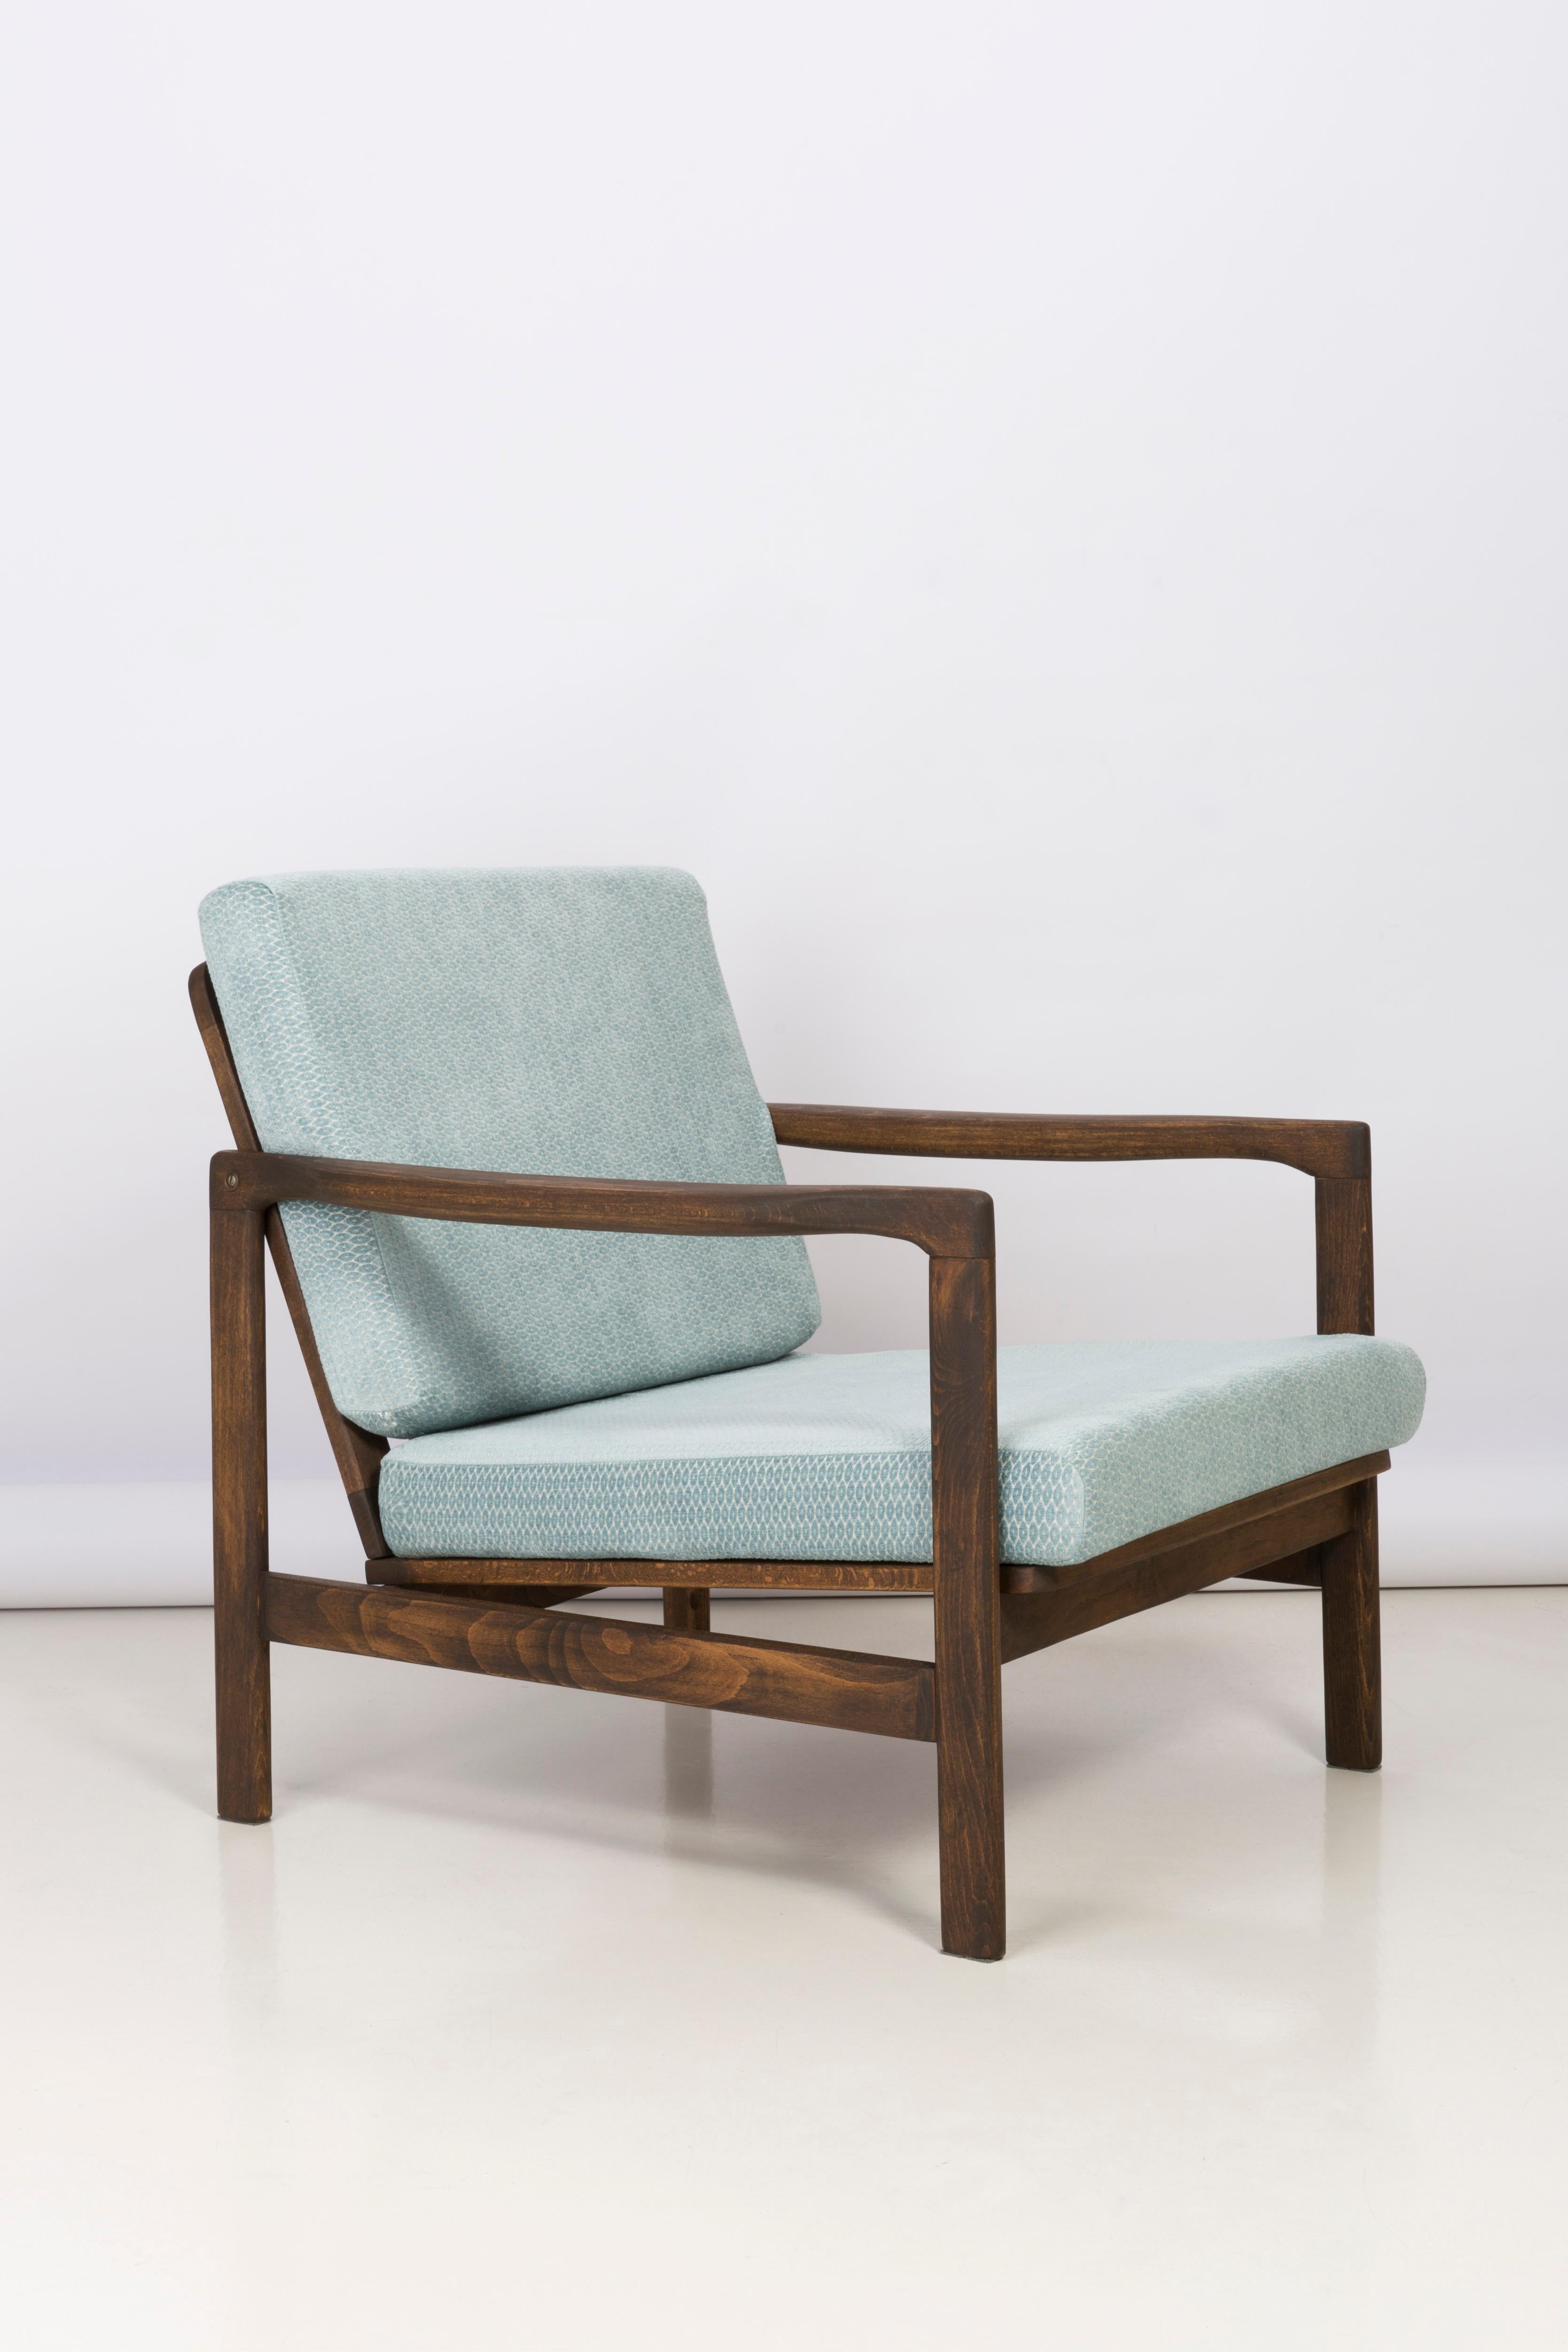 The B-7522 armchair was designed in the 1960s by Zenon Baczyk, it was produced by Swarzedz furniture factories in Poland. Furniture kept in perfect condition, after full upholstery and wood renovation. Stabile and very comfortable armchair, dressed